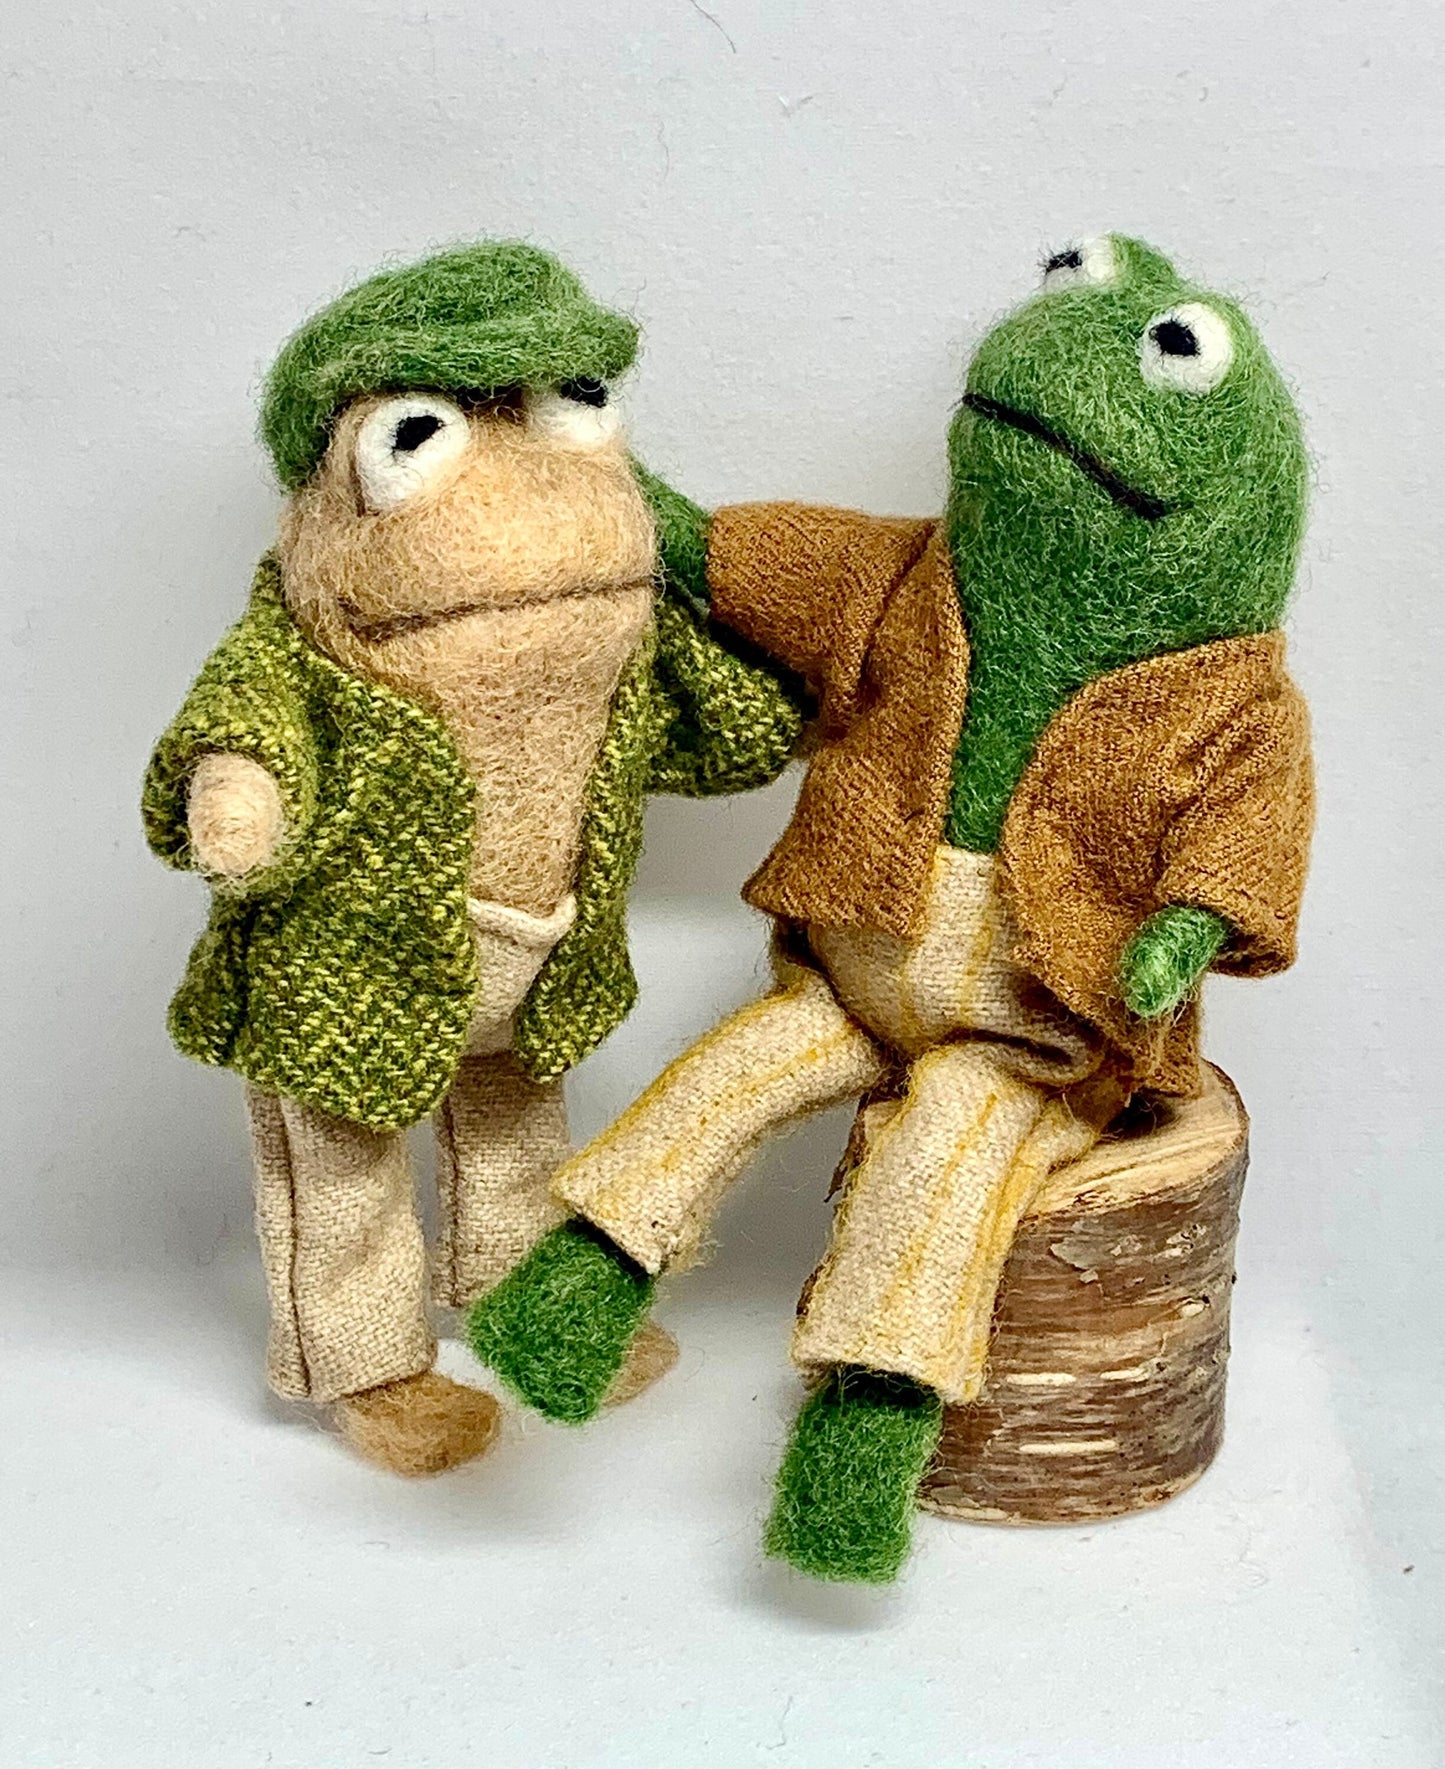 Frog and Toad Sculptures